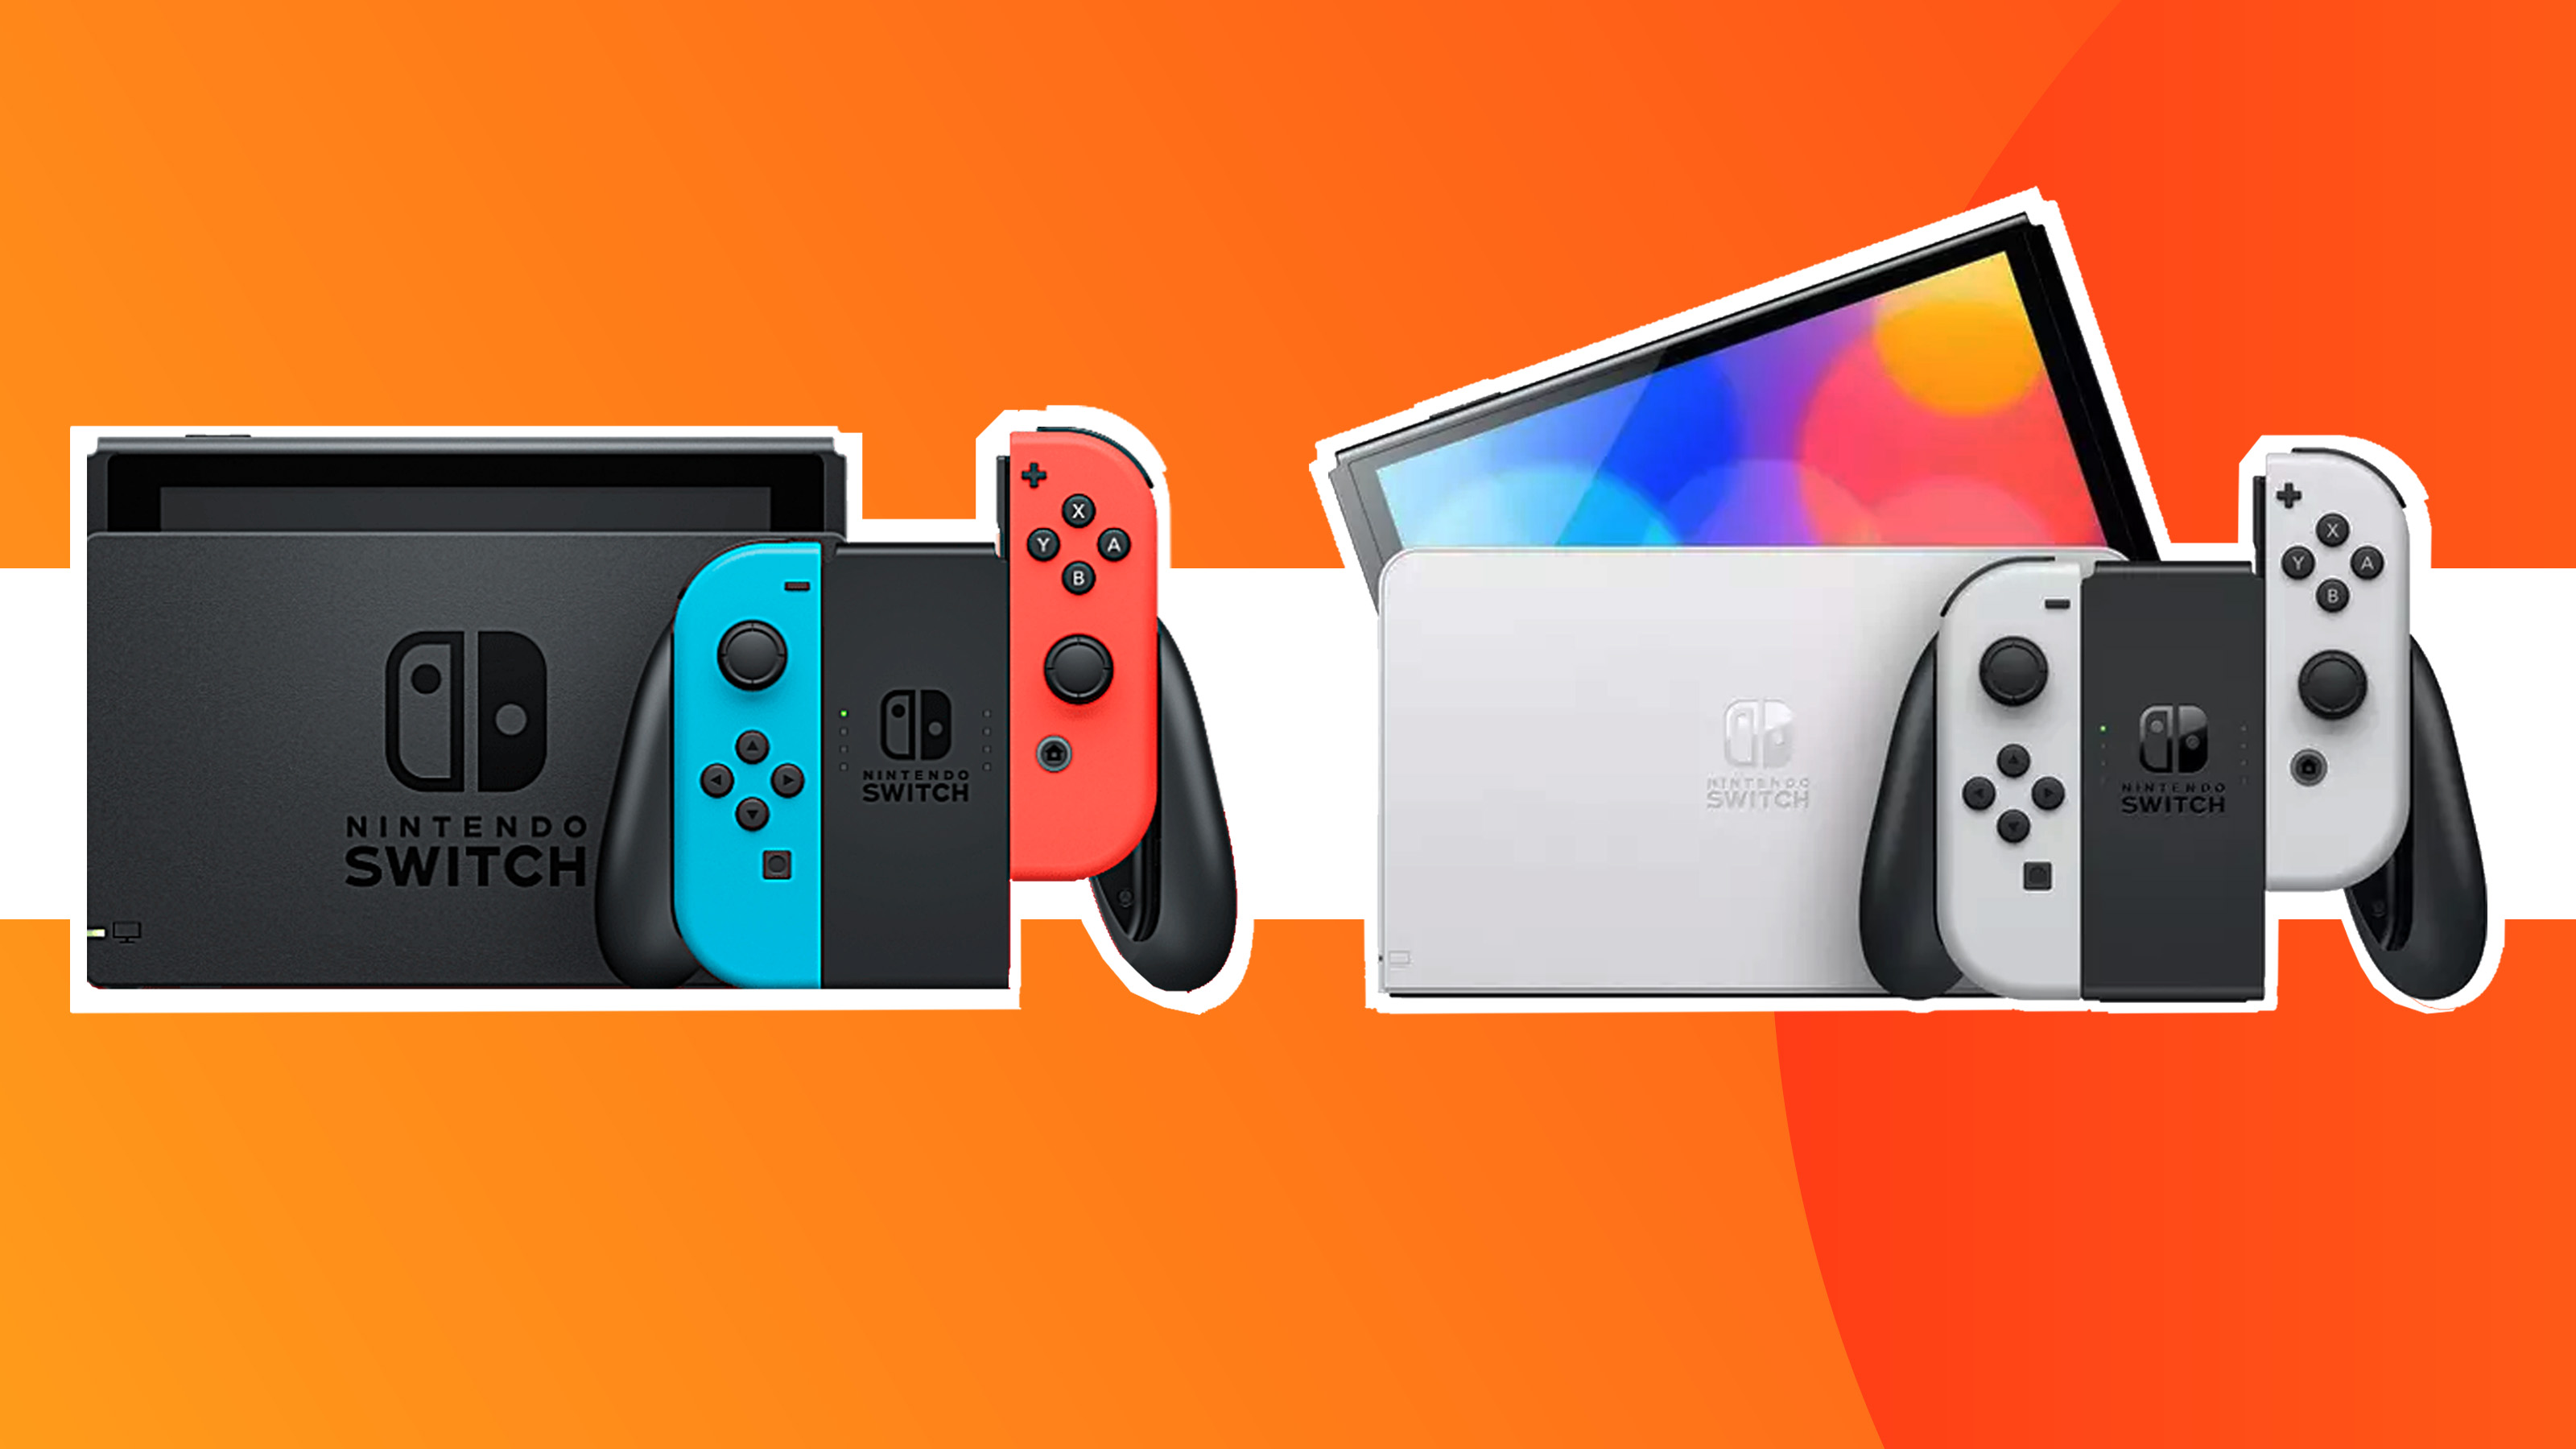 Nintendo Switch vs Switch OLED: which should you buy? | Creative Bloq